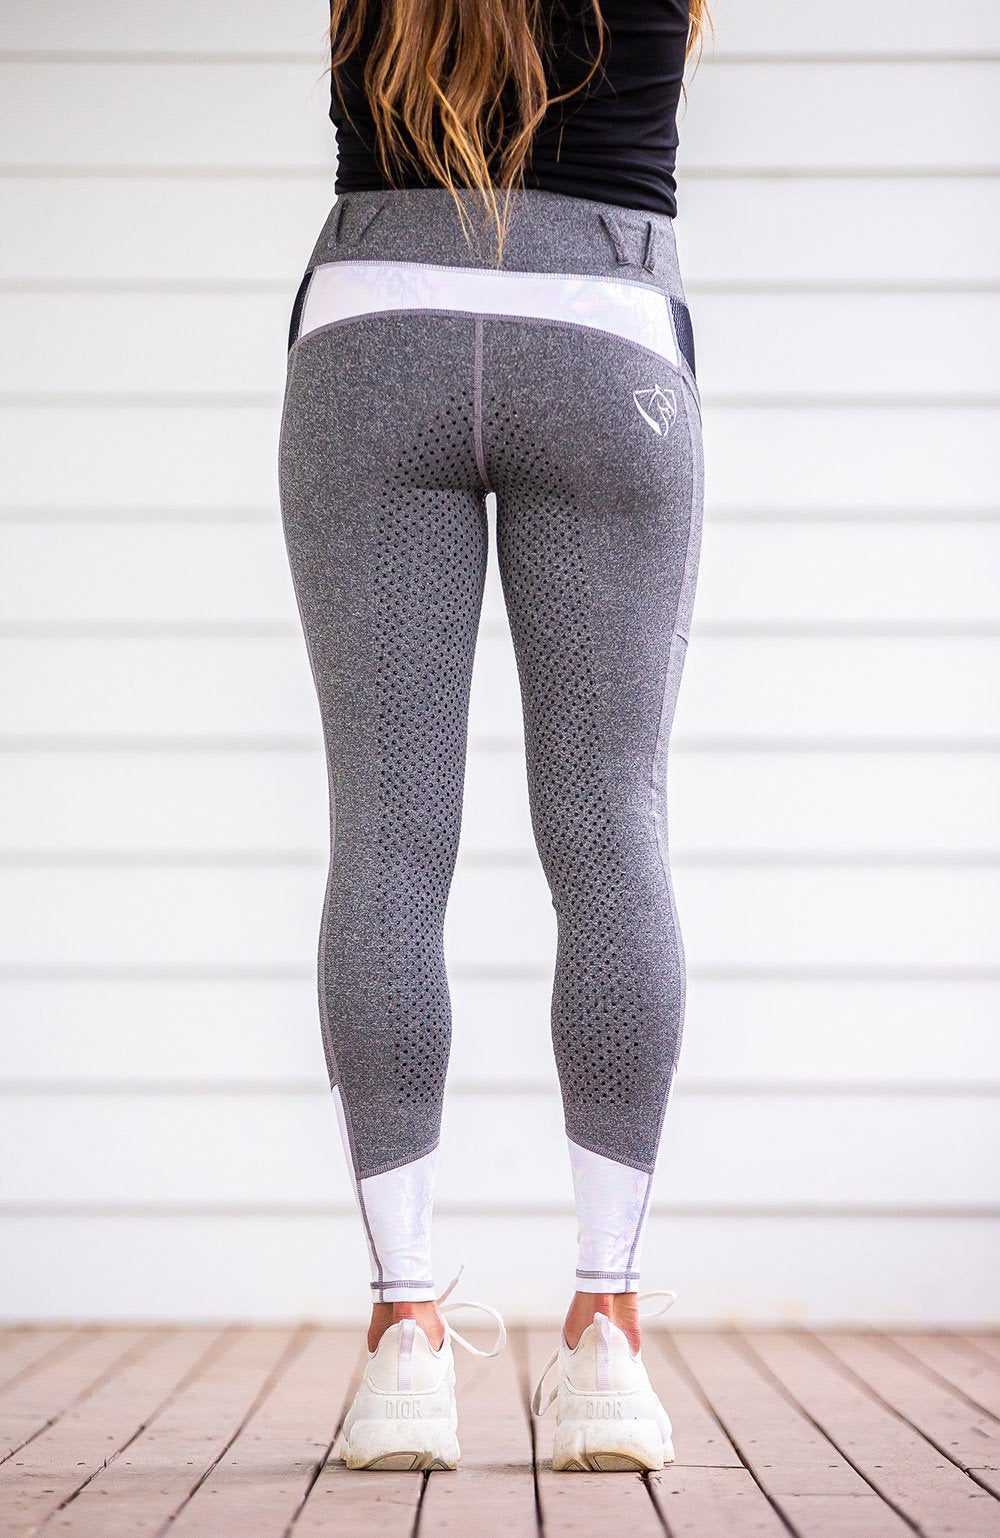 BARE Performance Riding Tights - Grey Unicorn (White Shimmer)